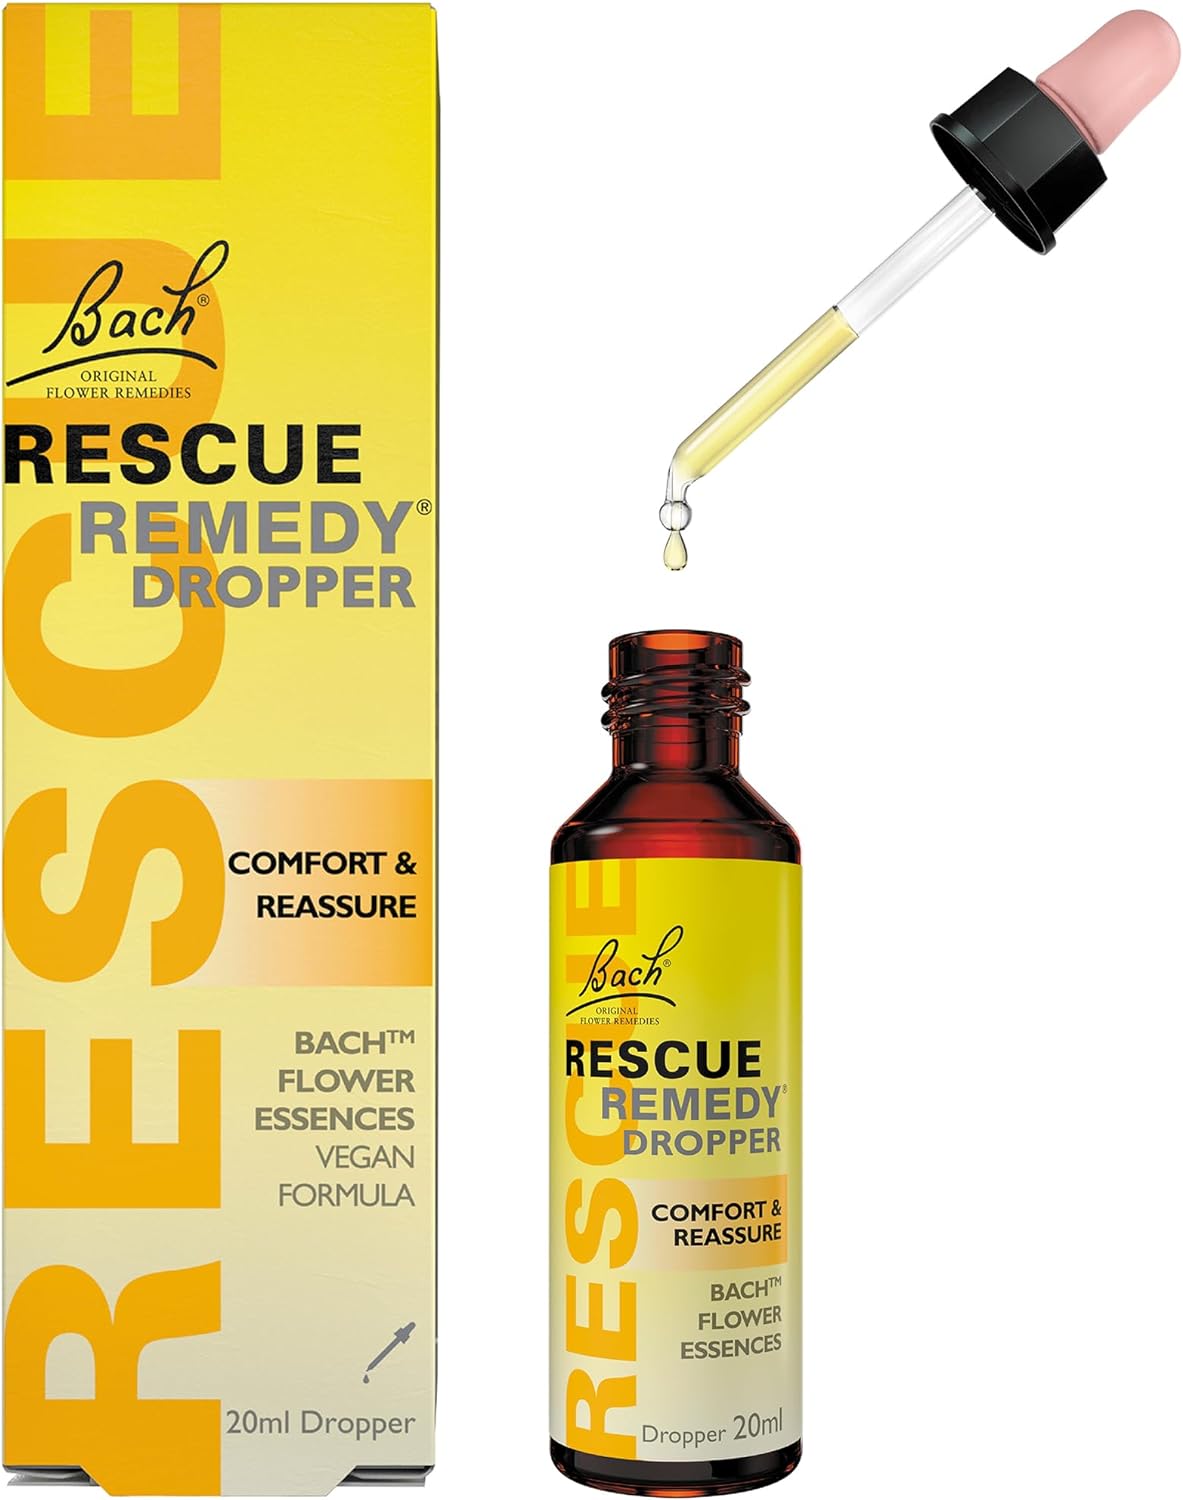 RESCUE REMEDY Dropper, 20mL? Natural Homeopathic Stress Relief